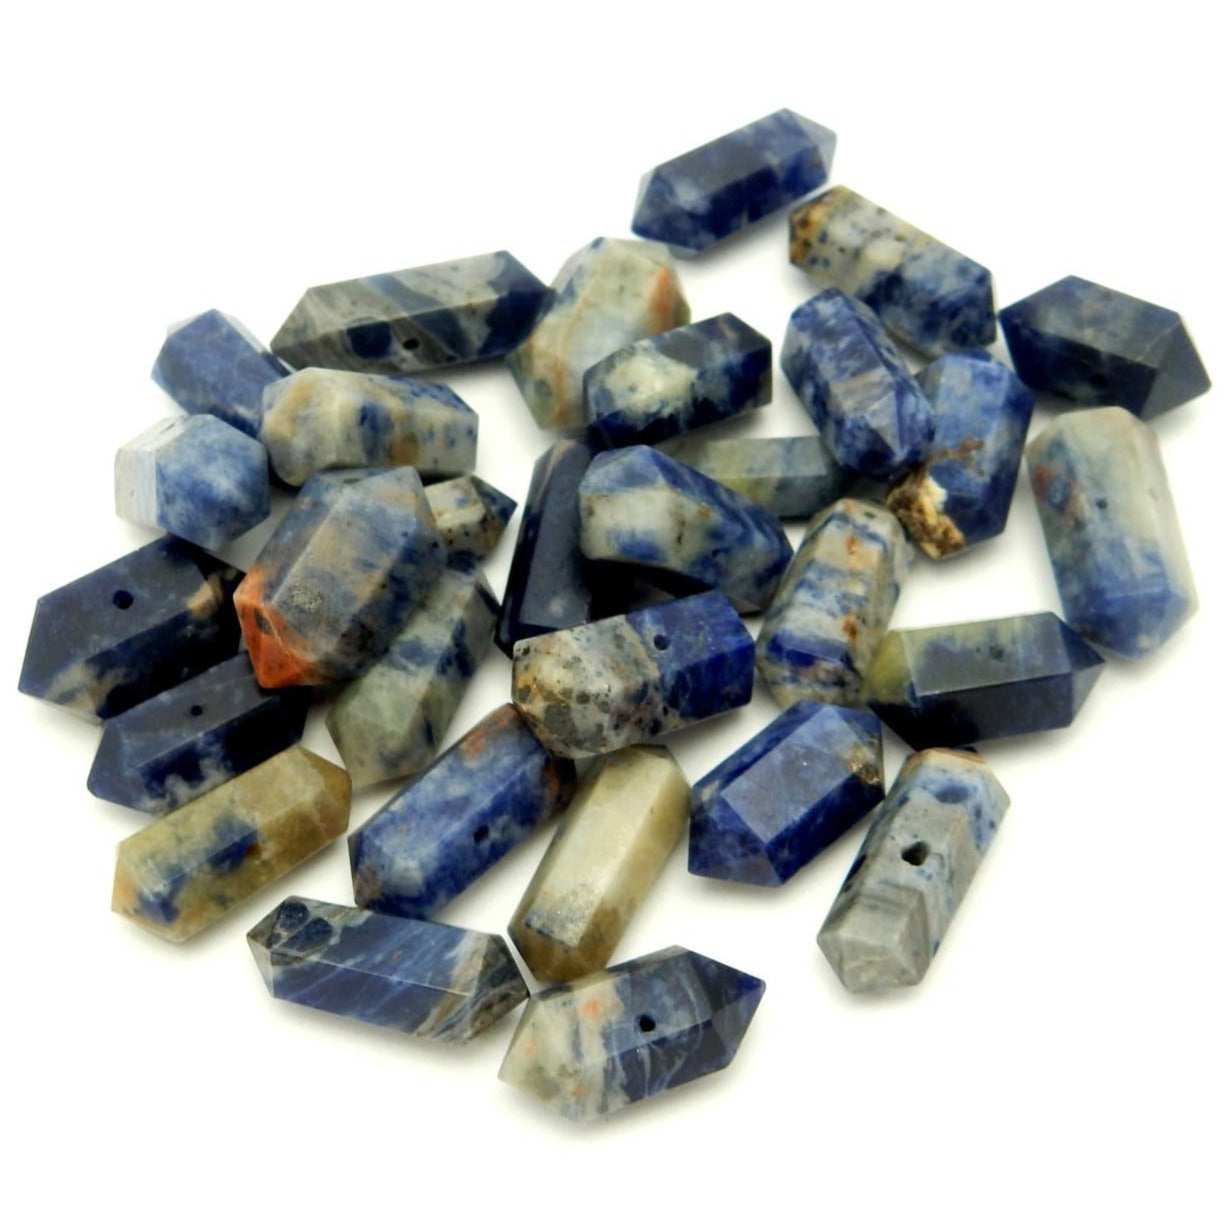 Petite Sodalite Double Terminated Pencil Point Center Drilled Bead in a bundle 